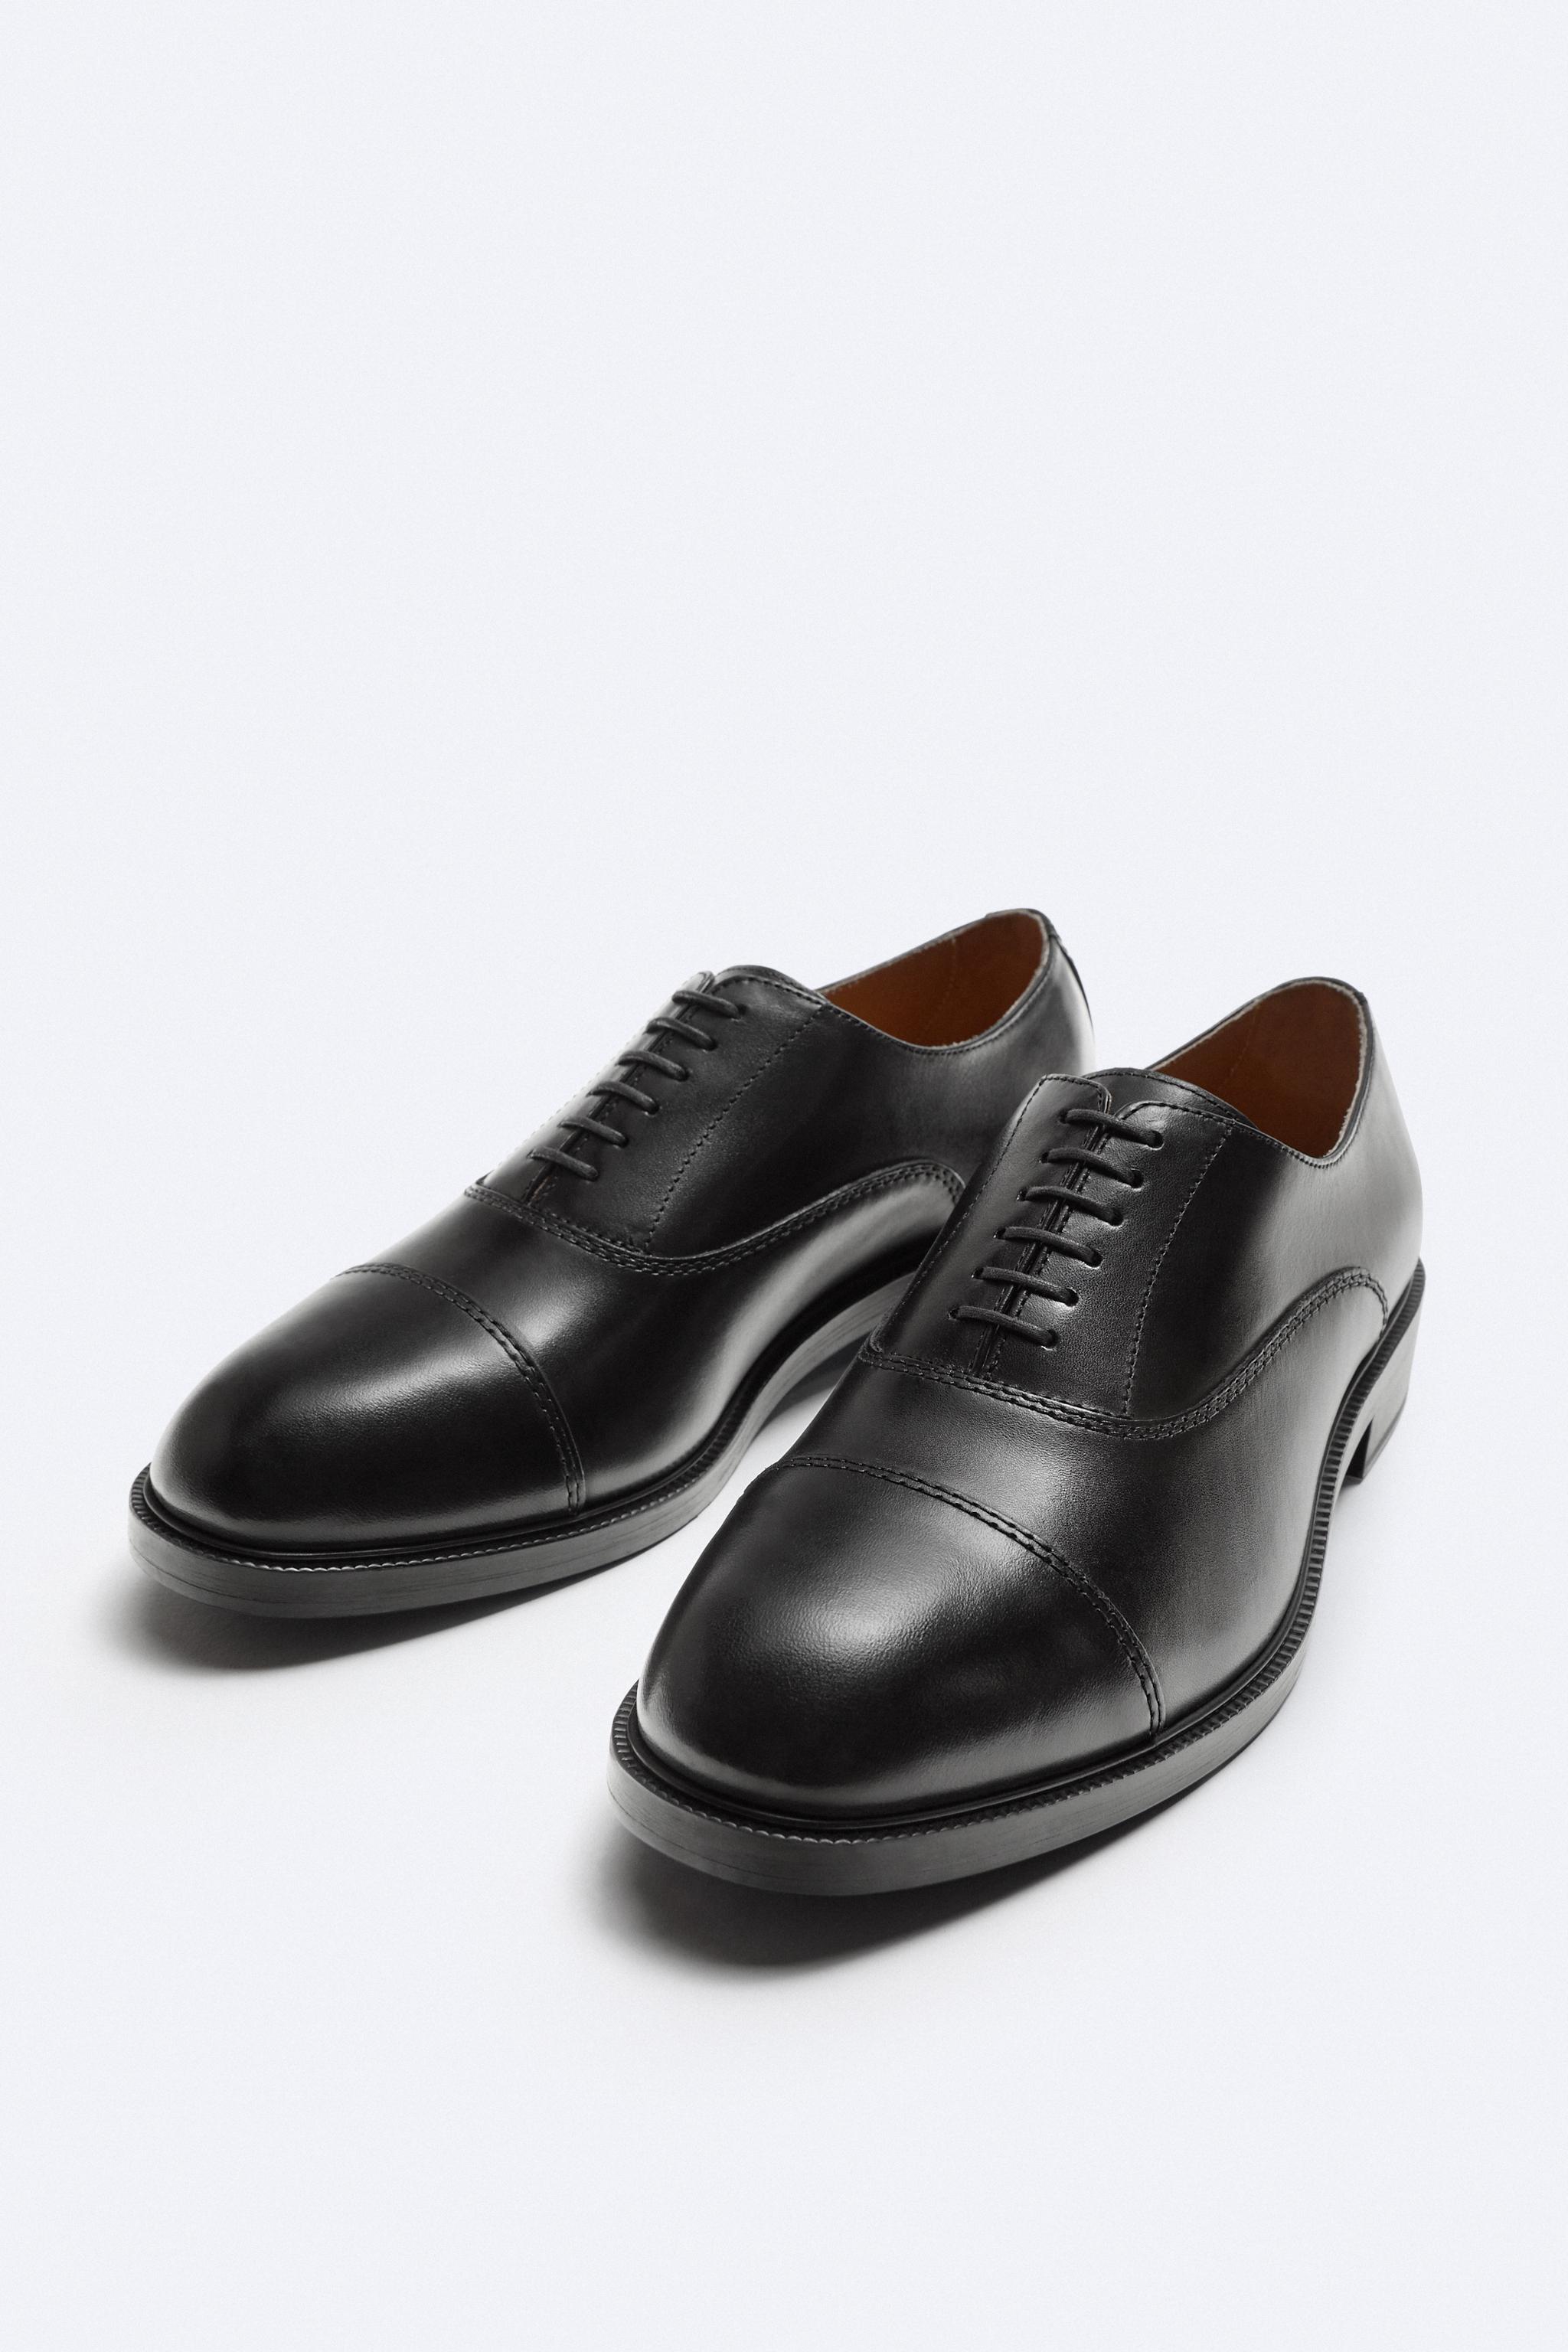 LEATHER OXFORD SHOES - Brown | ZARA United States